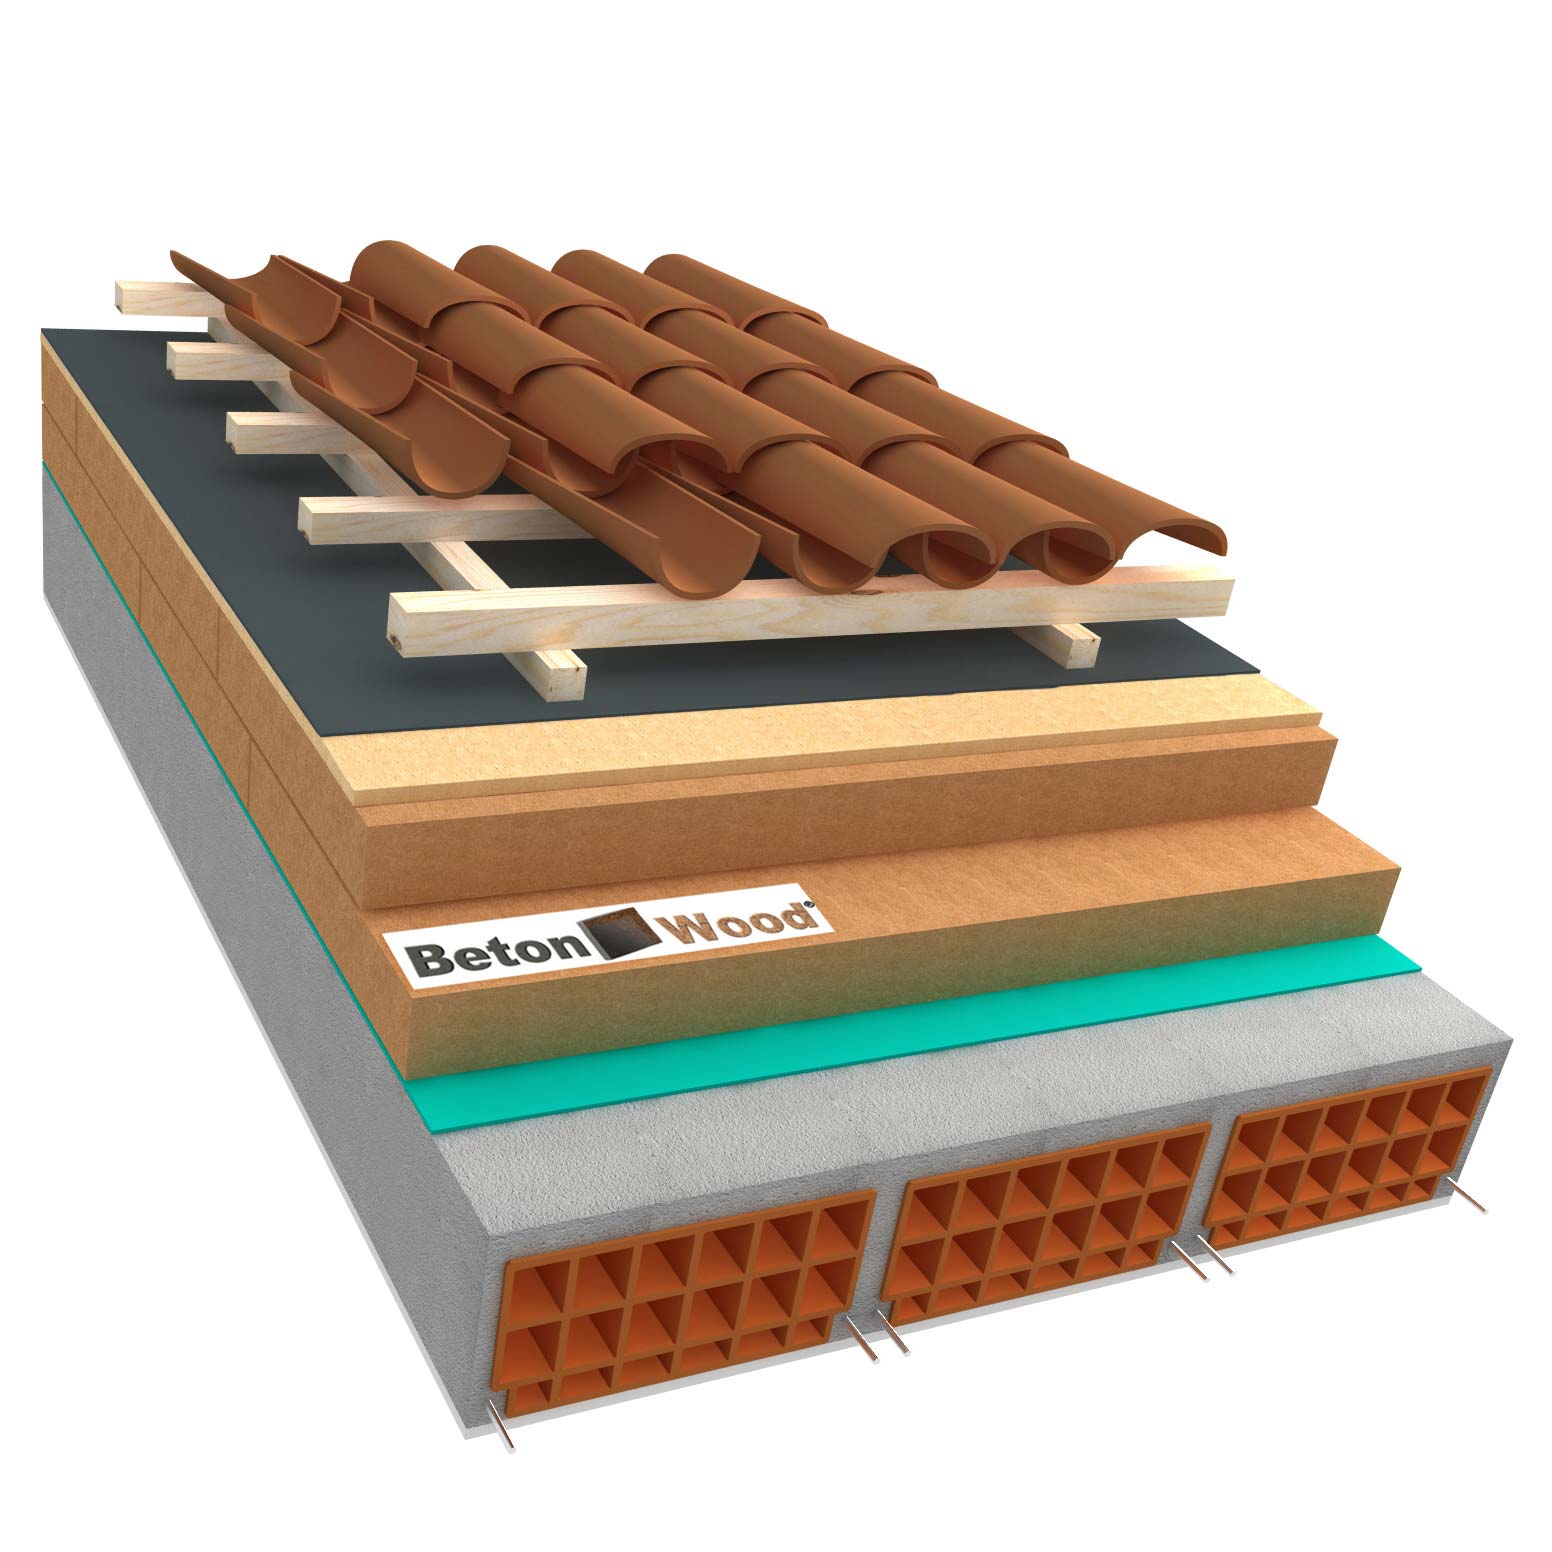 Ventilated roof with wood fiber Isorel and Therm on concrete